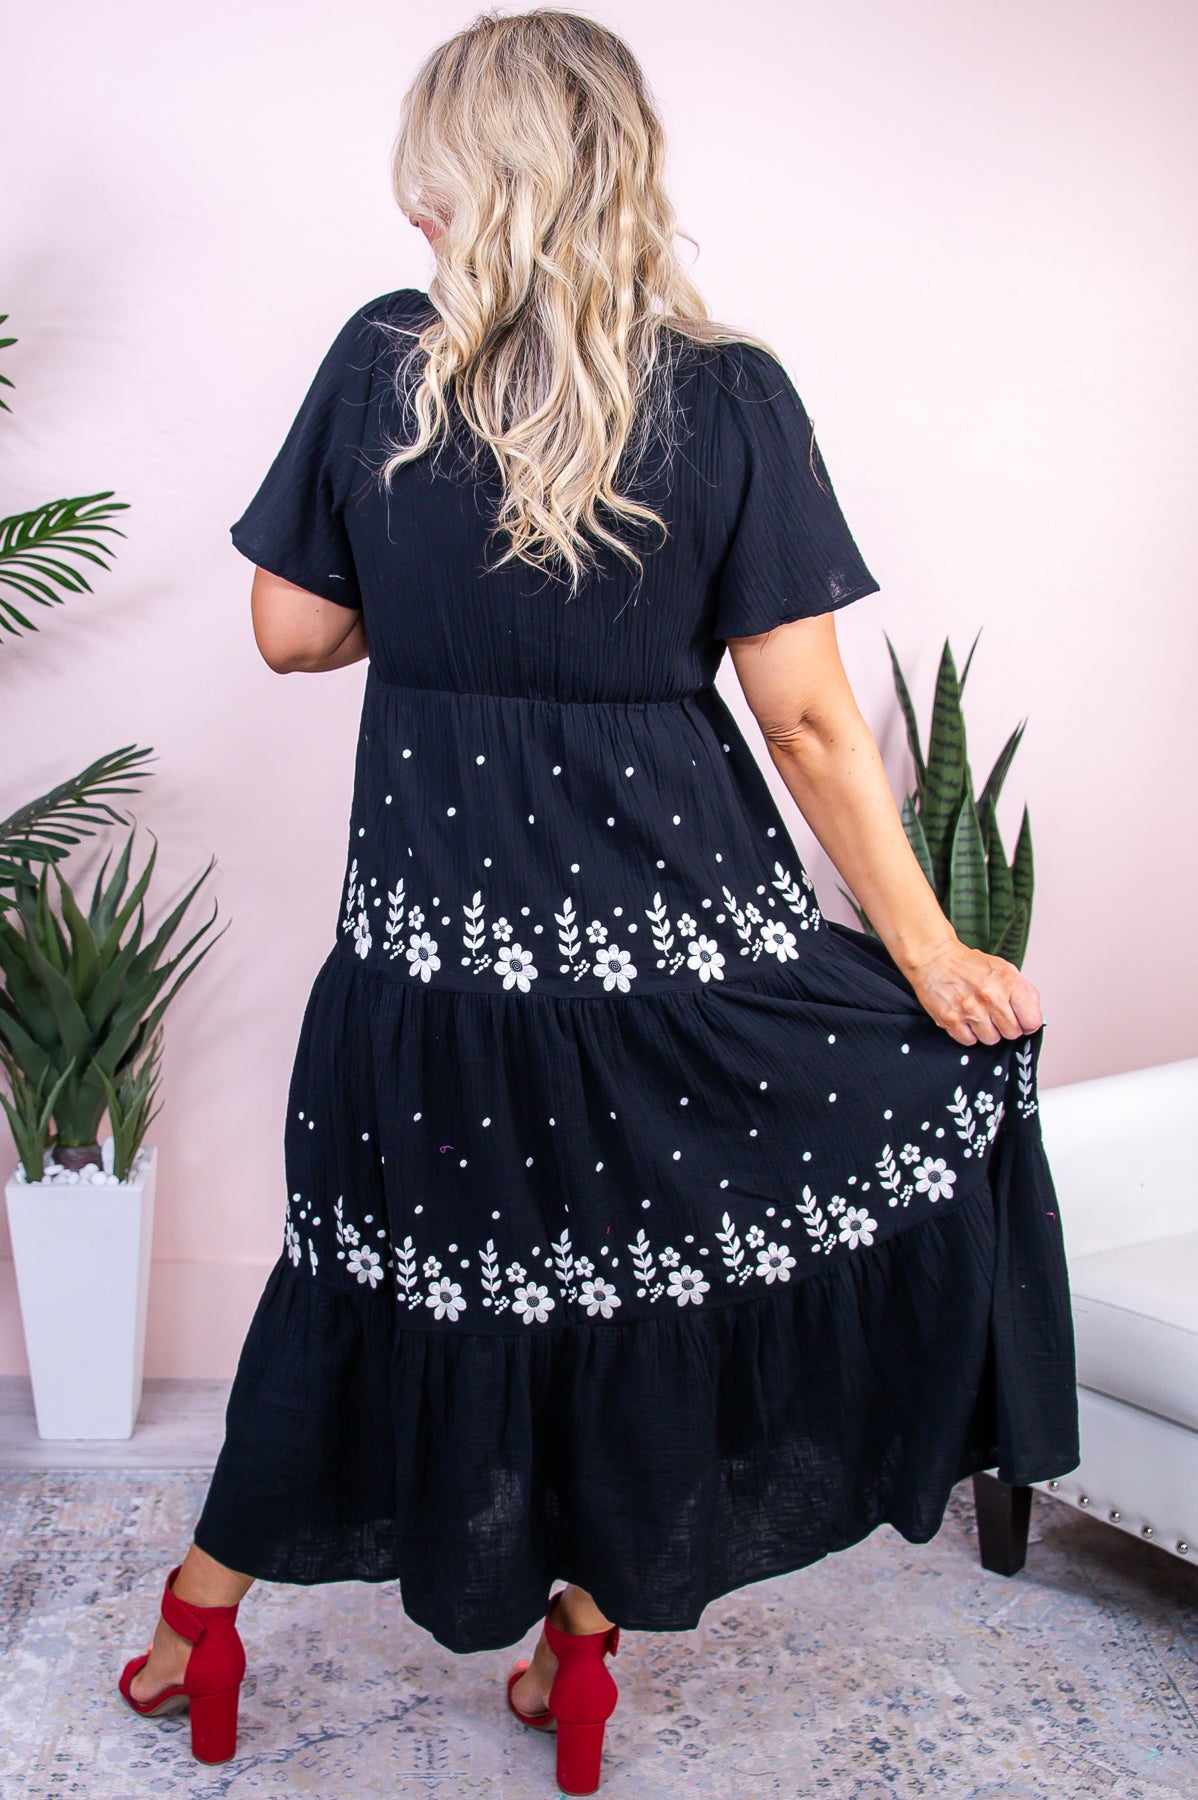 With Stylish Ease Black/White Floral Embroidered Dress - D5286BK